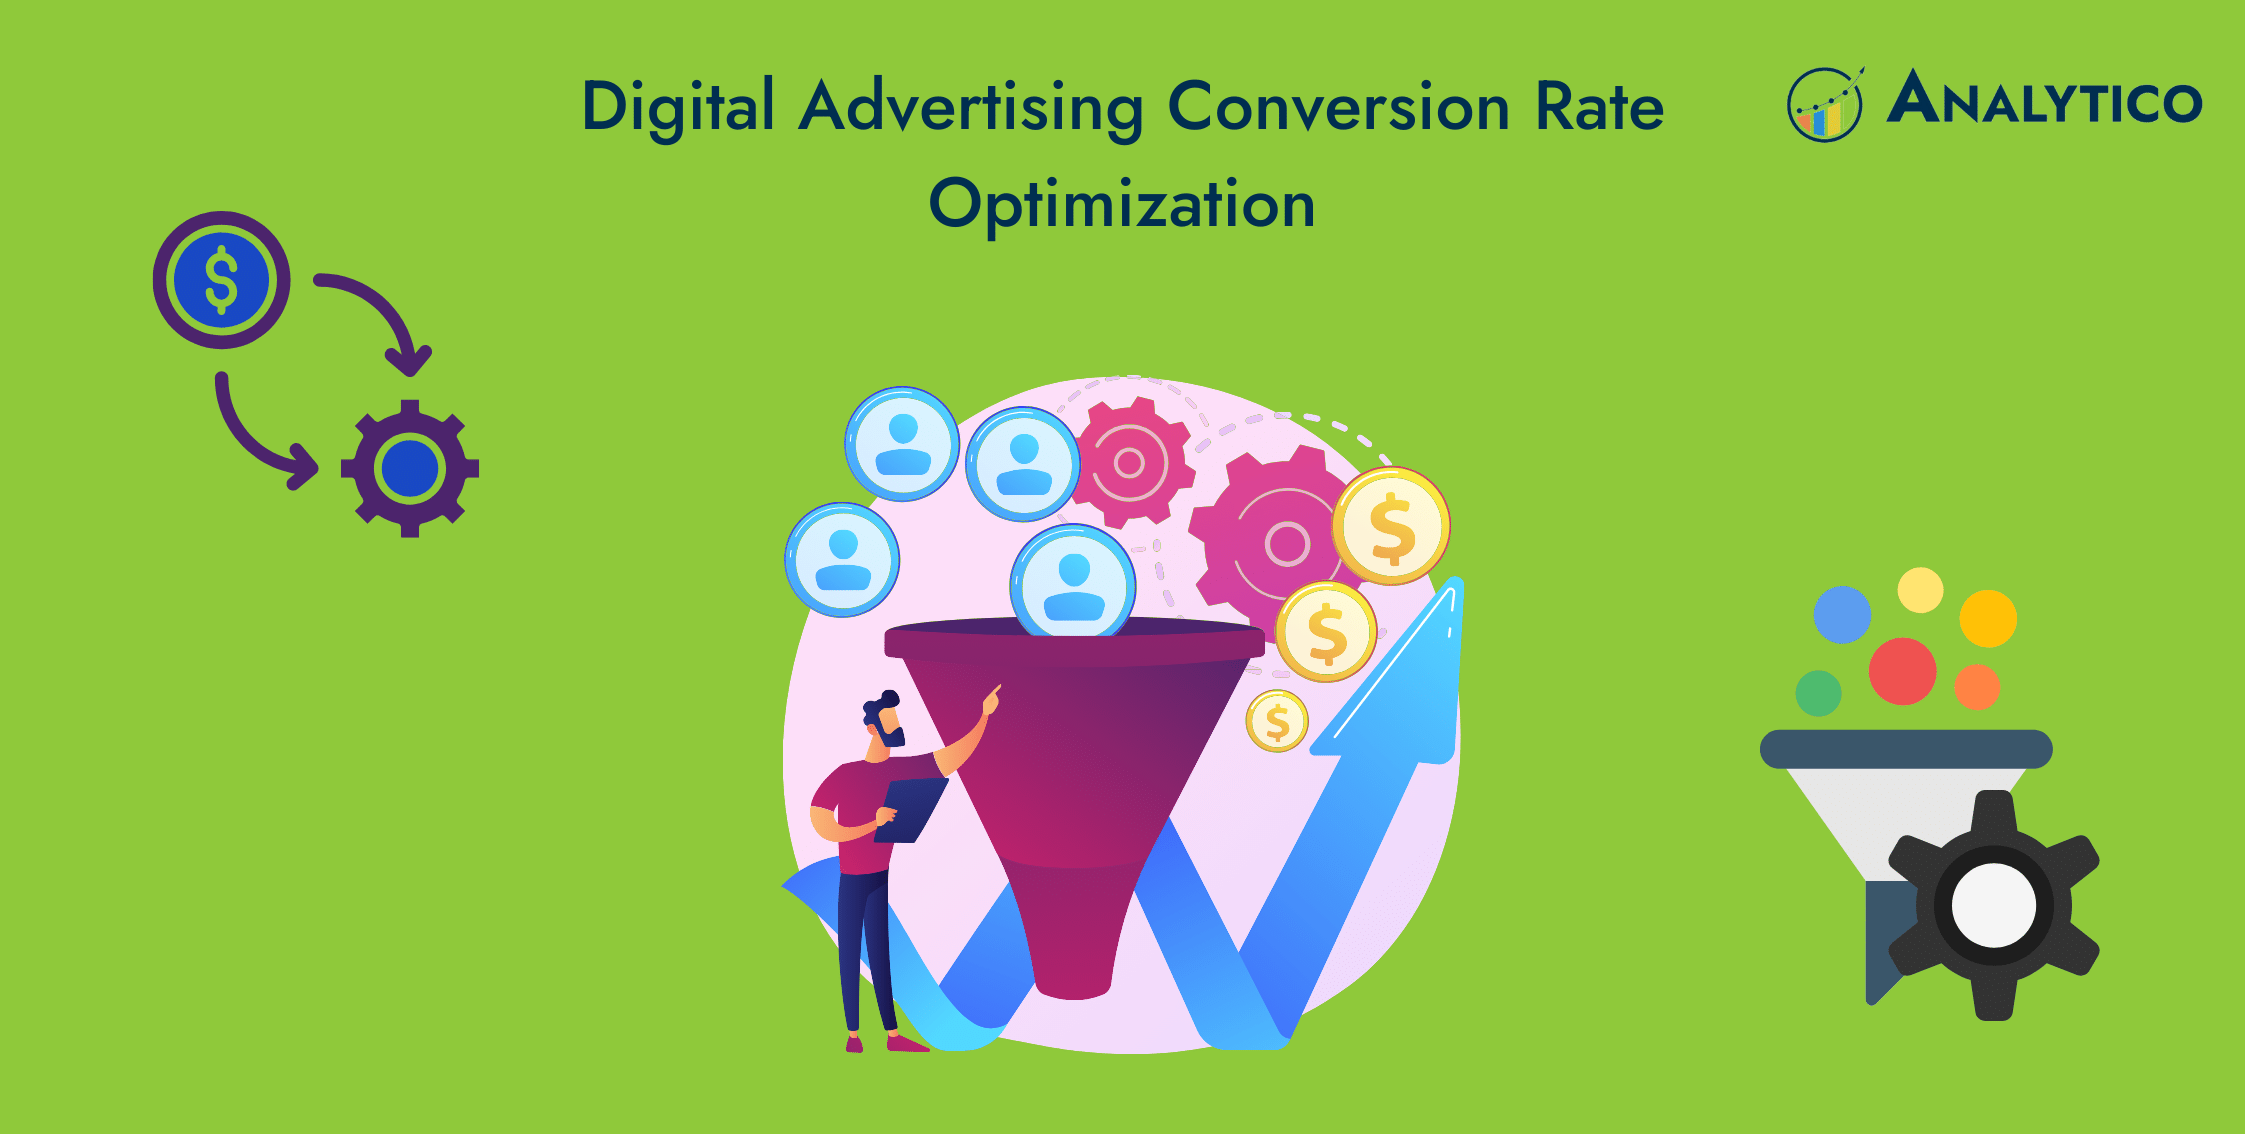 Digital Advertising Conversion Rate Optimization: Analytical Approach